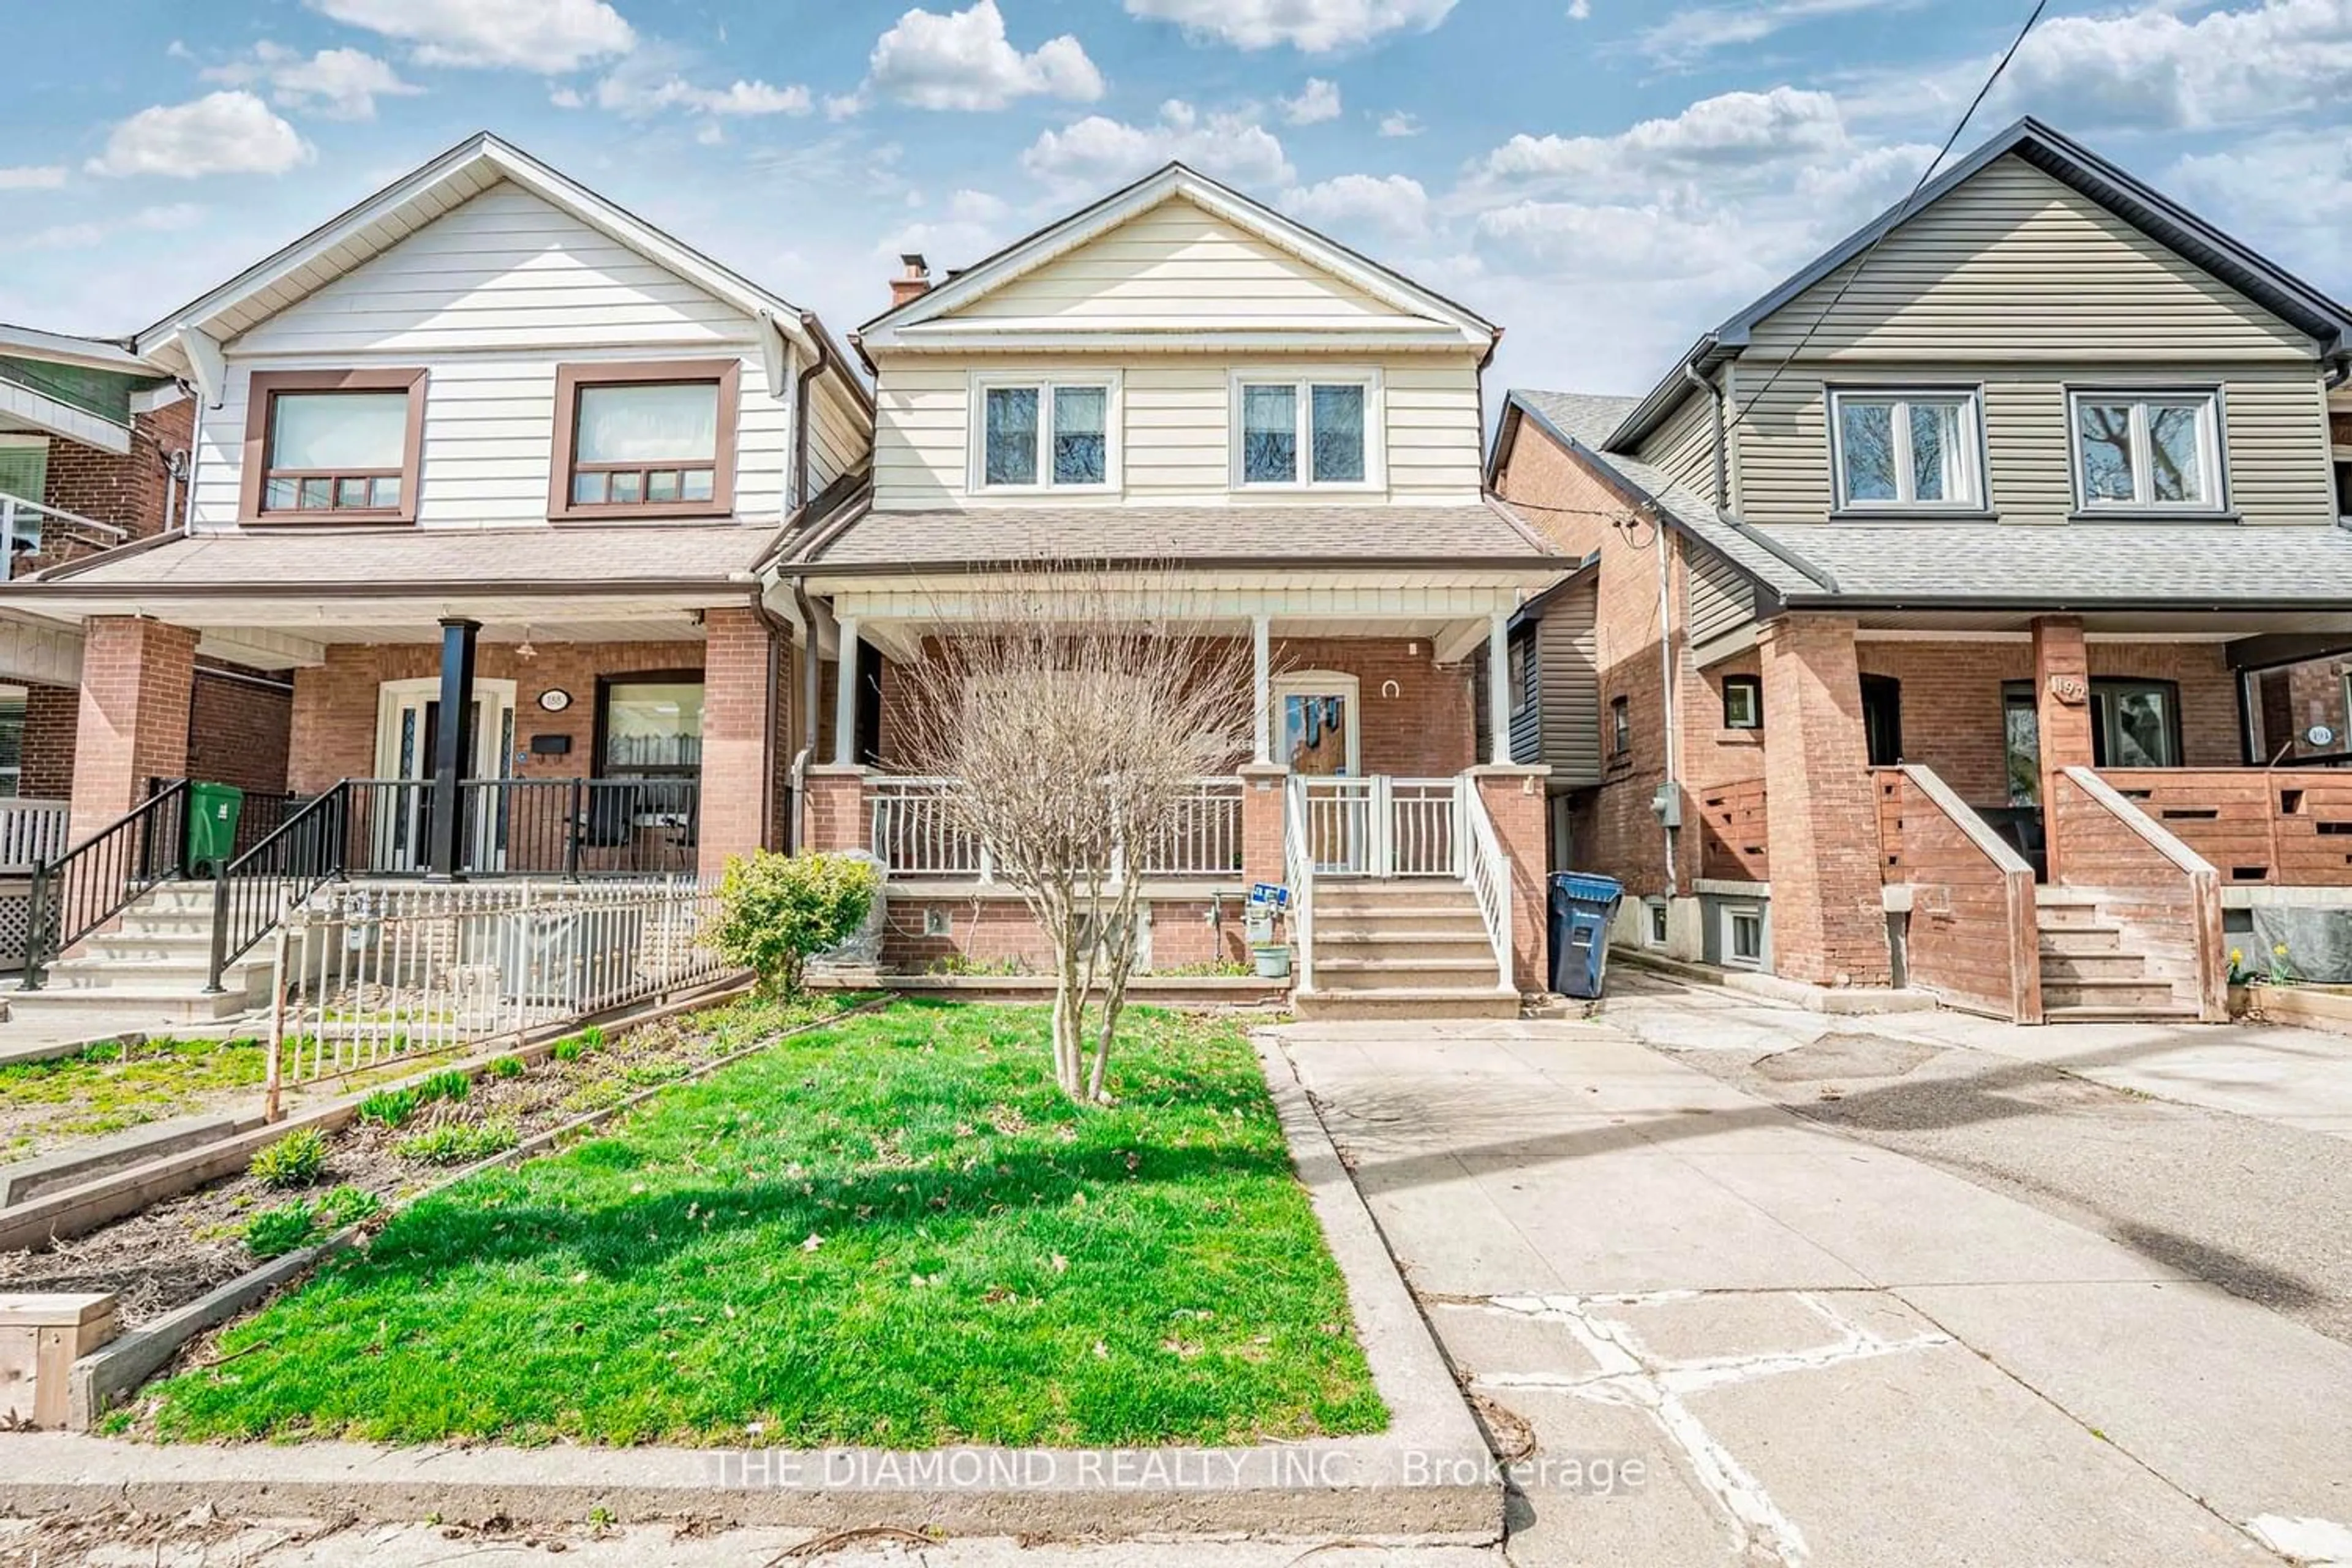 Frontside or backside of a home for 190 Northcliffe Blvd, Toronto Ontario M6E 3K6